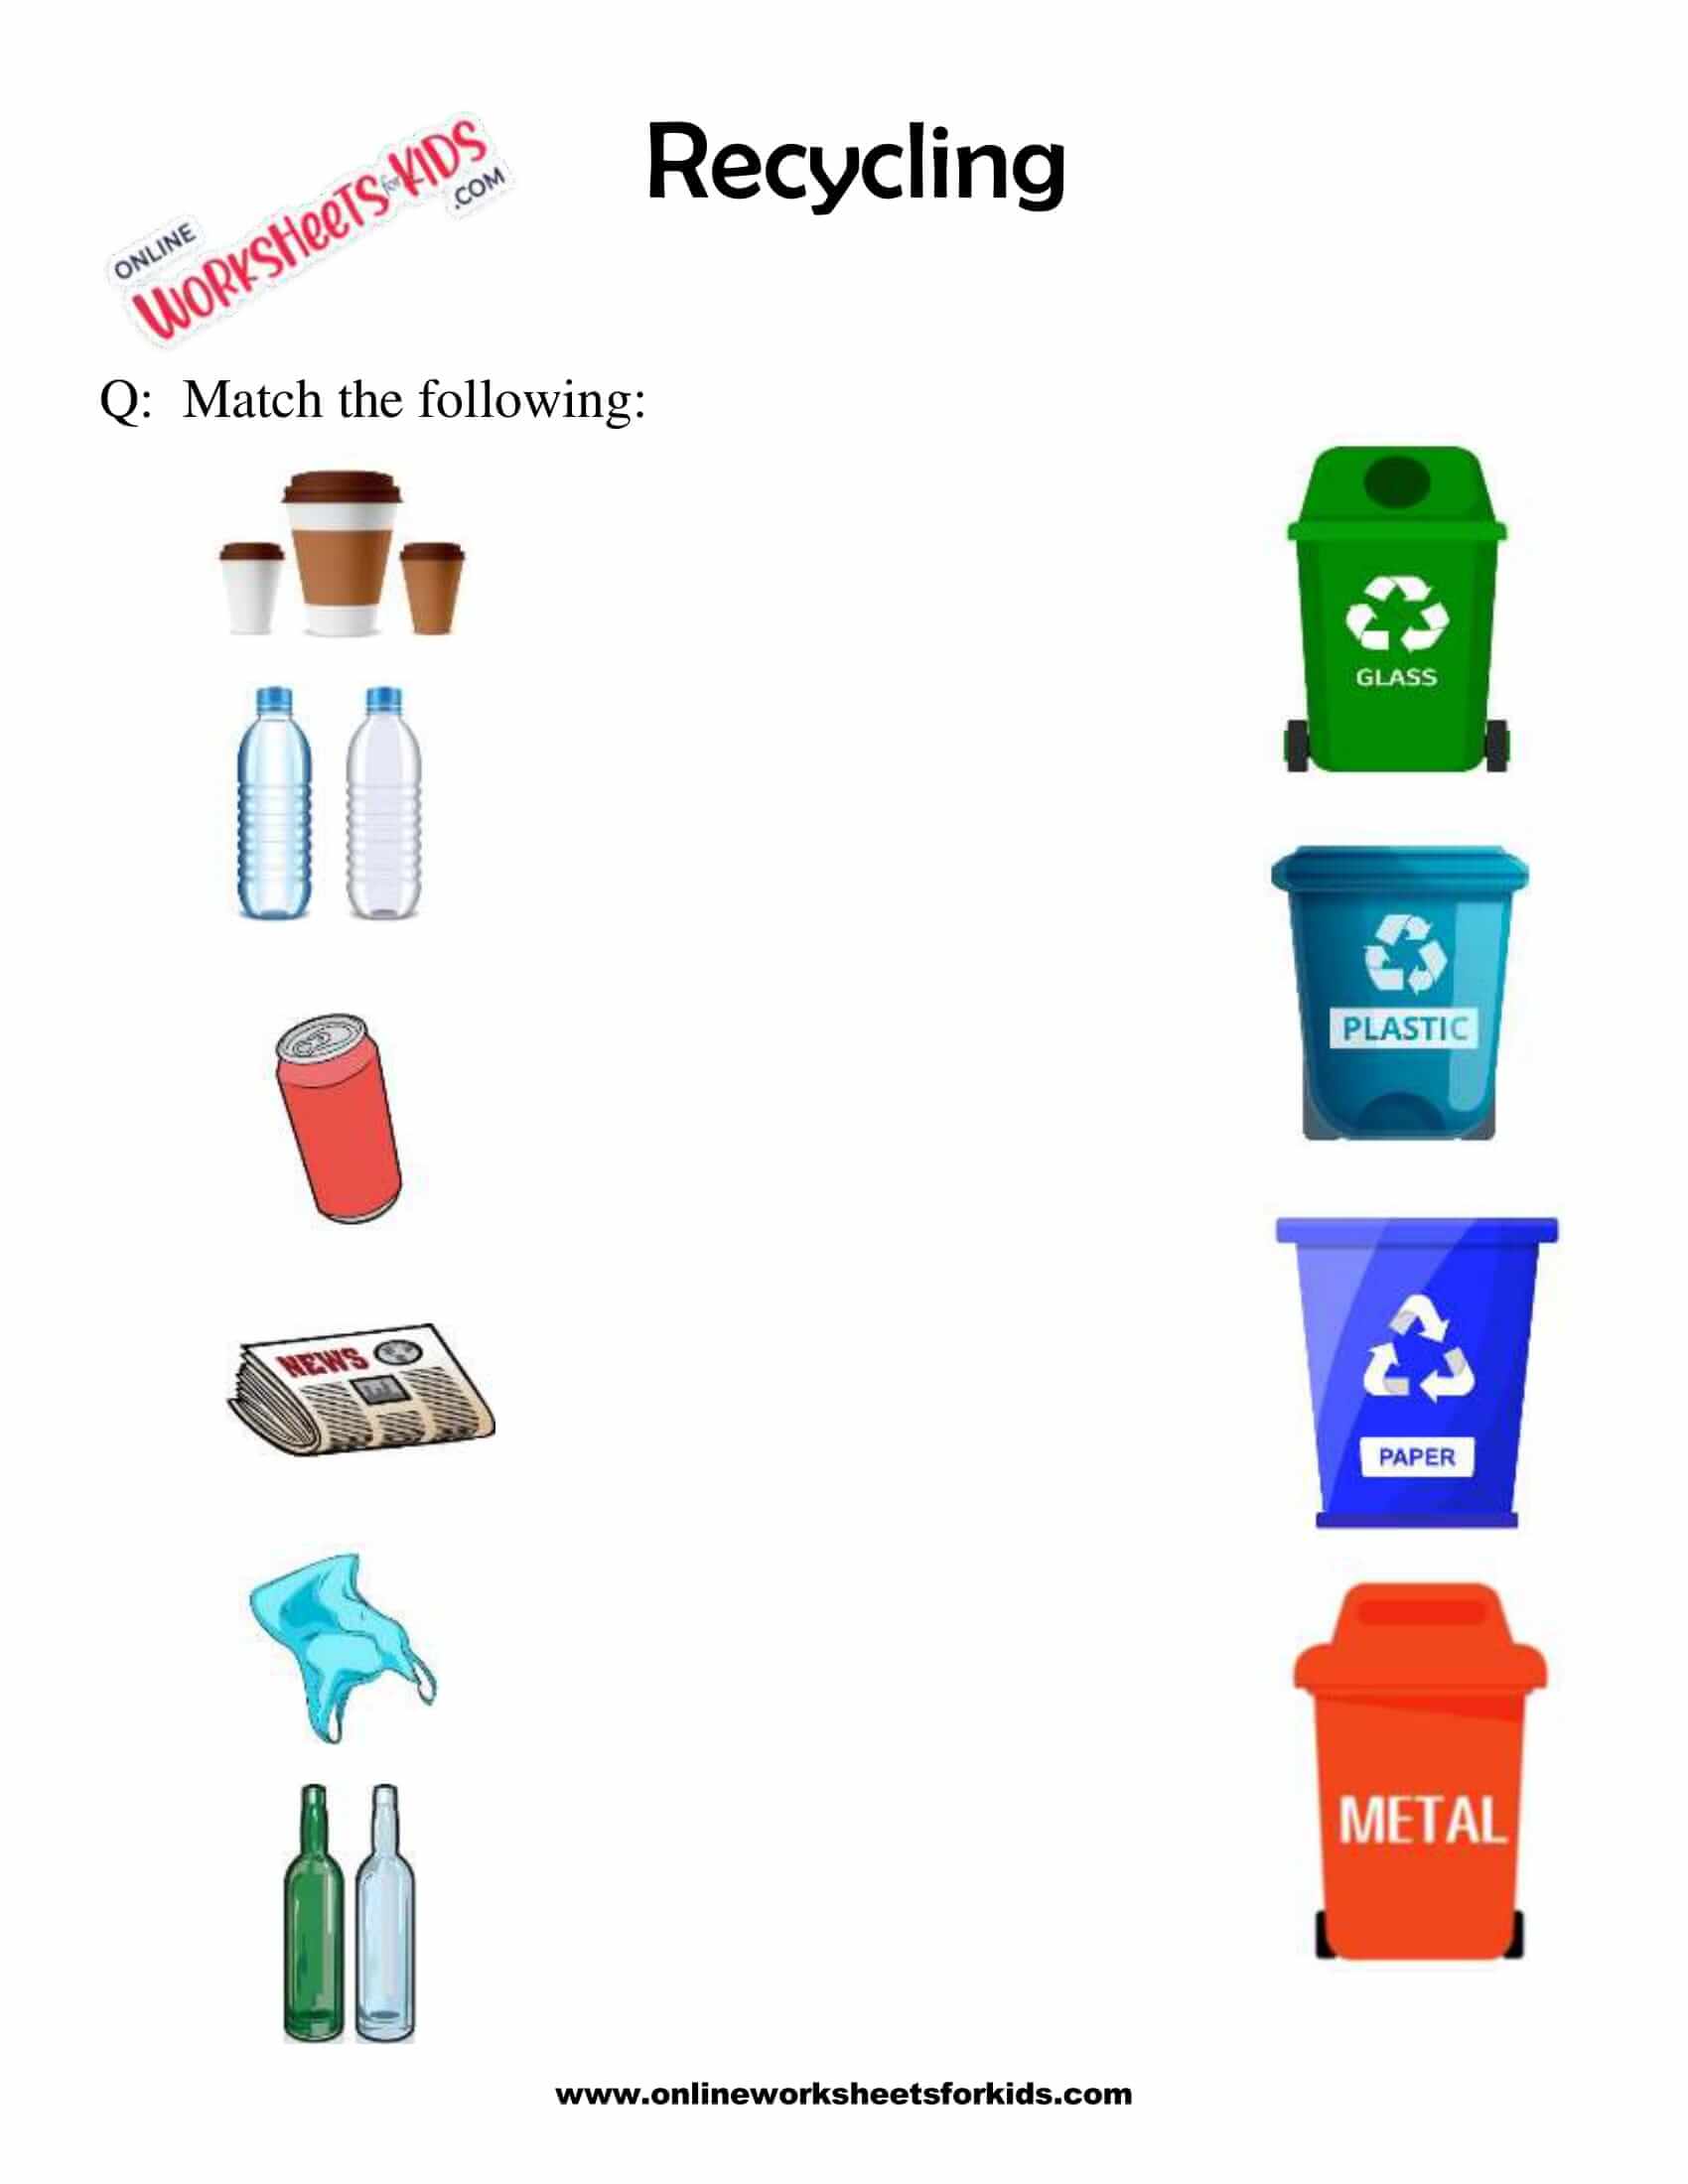 How Do You Teach Kids to Reduce, Reuse & Recycle?